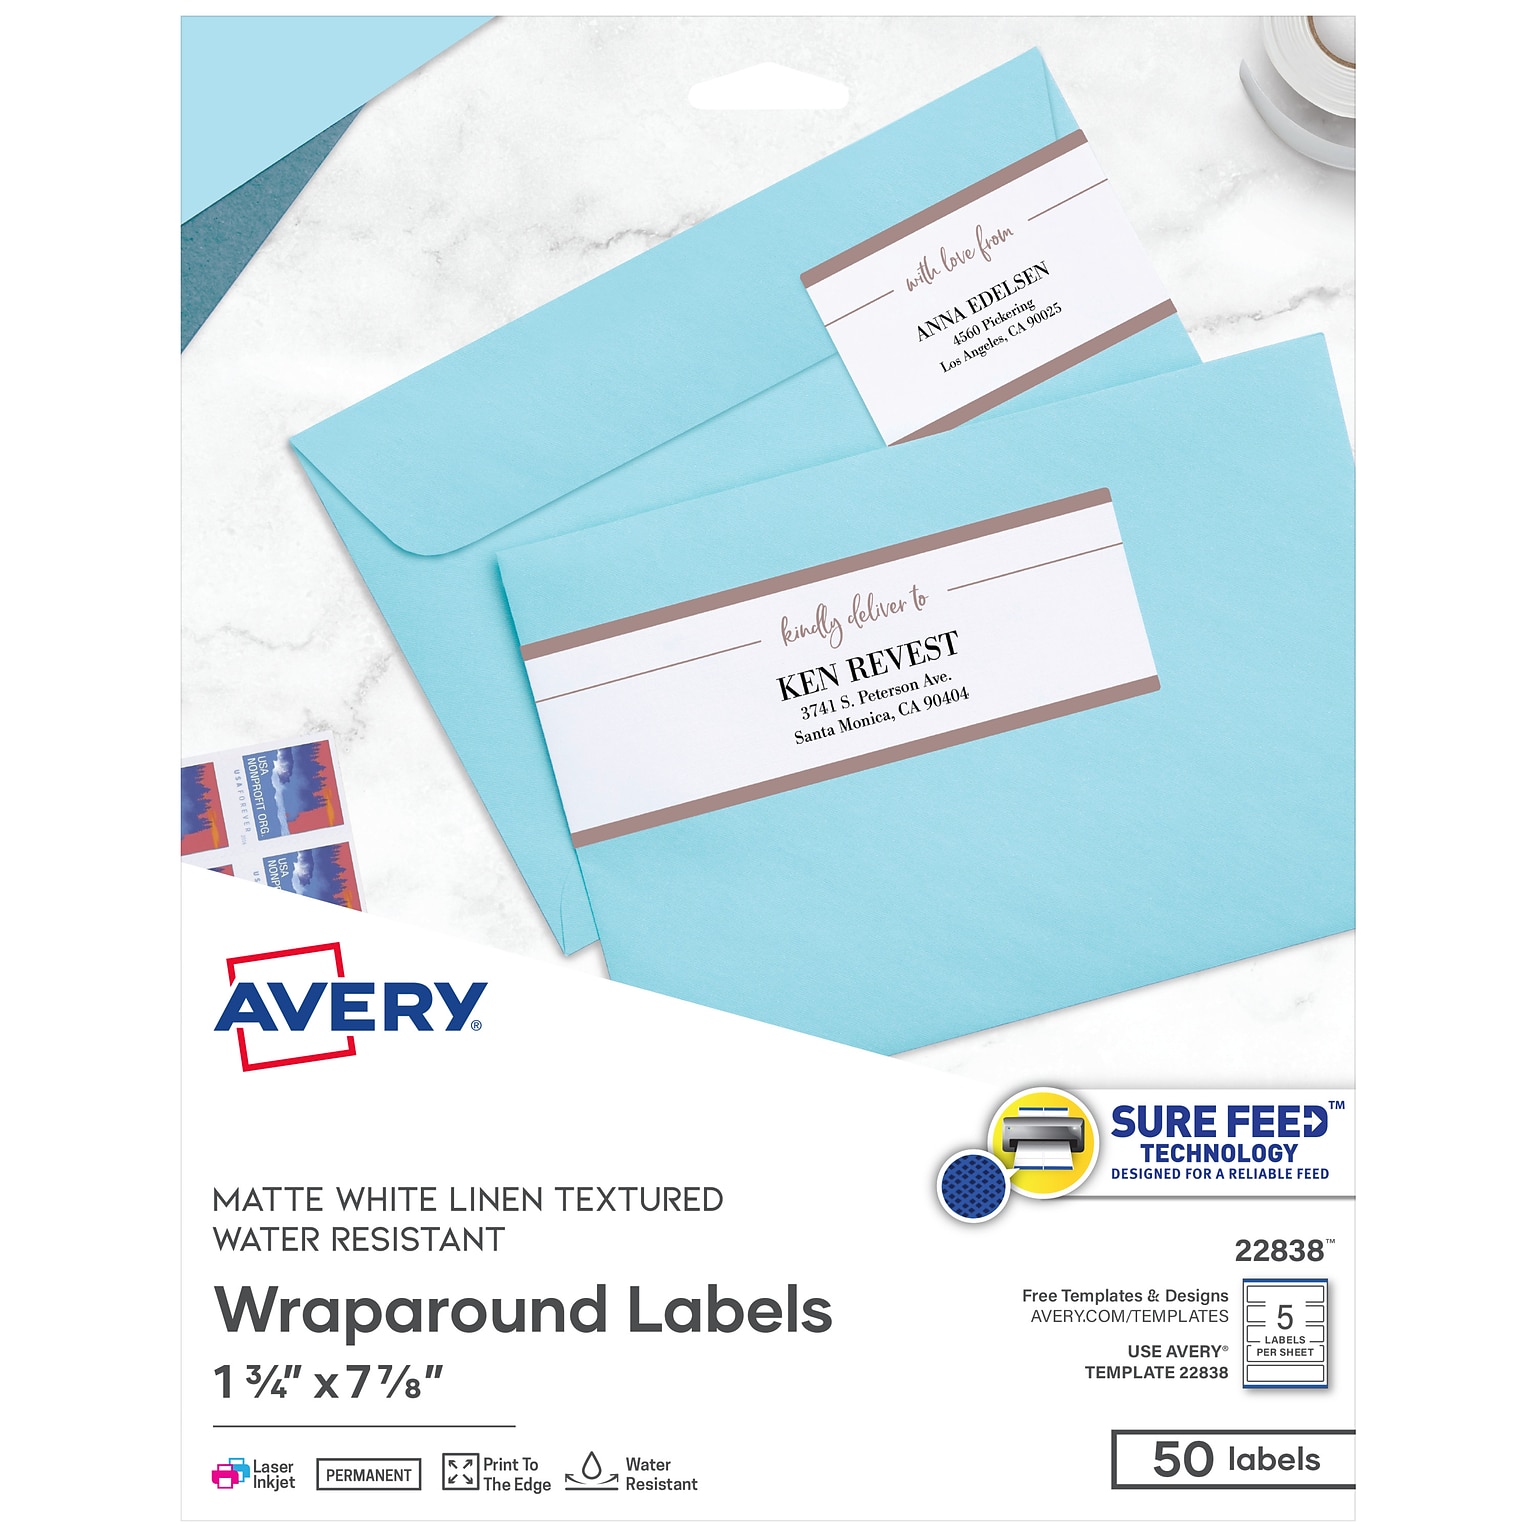 Avery Print-to-the-Edge Laser/Inkjet Labels, 7.85 x 1.75, White, 5 Labels/Sheet, 10 Sheets/Pack, 50 Labels/Pack (22838)